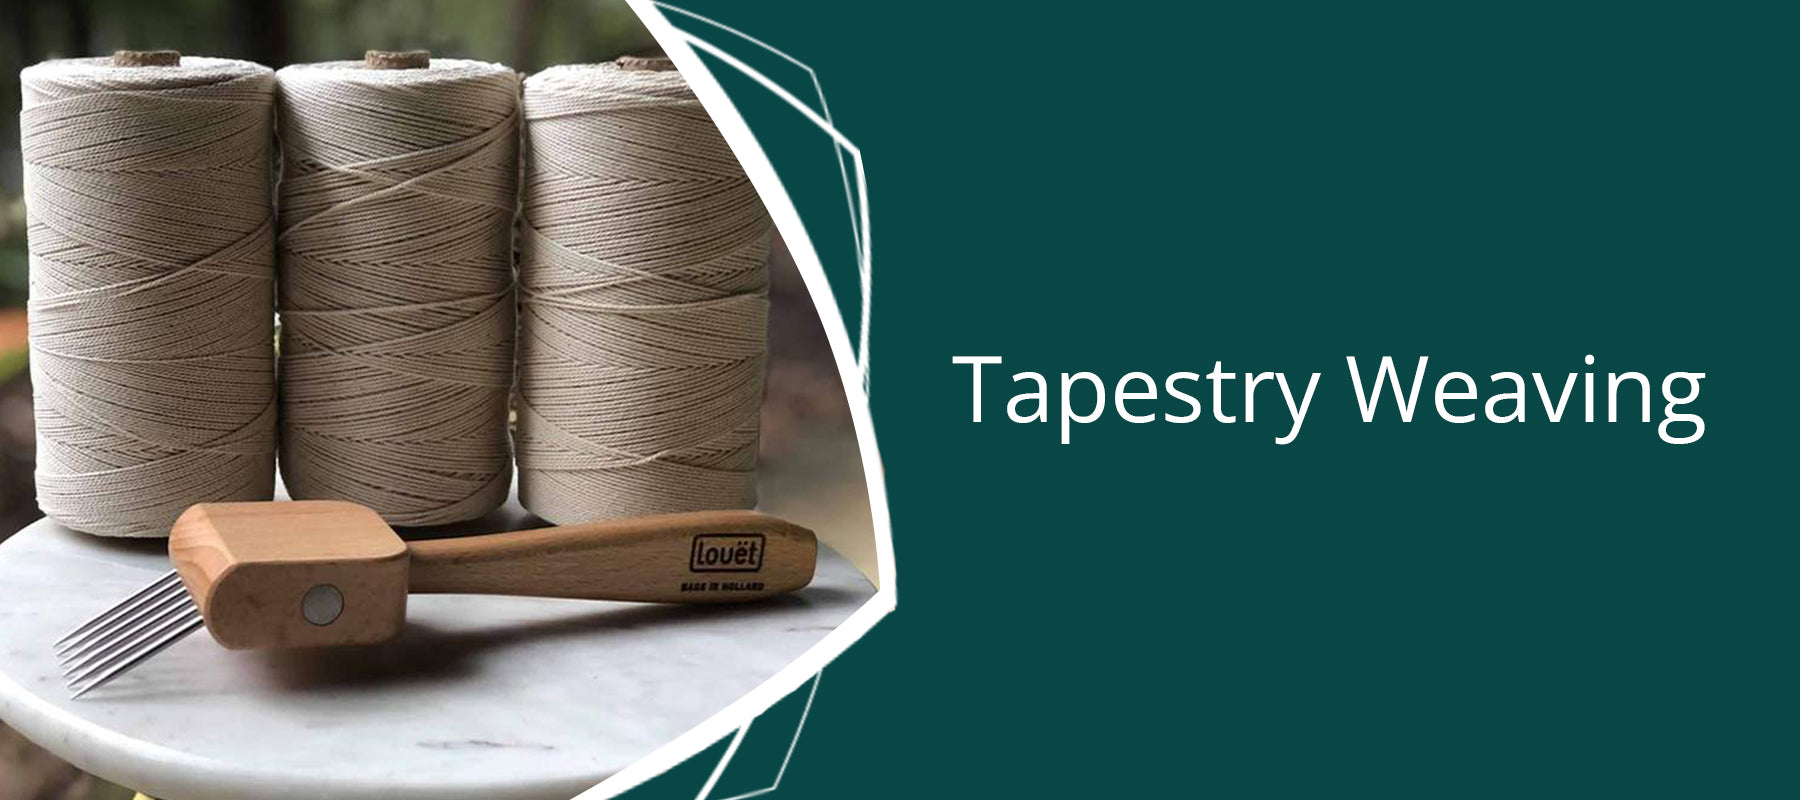 Tapestry weaving supplies and looms - Thread Collective Australia